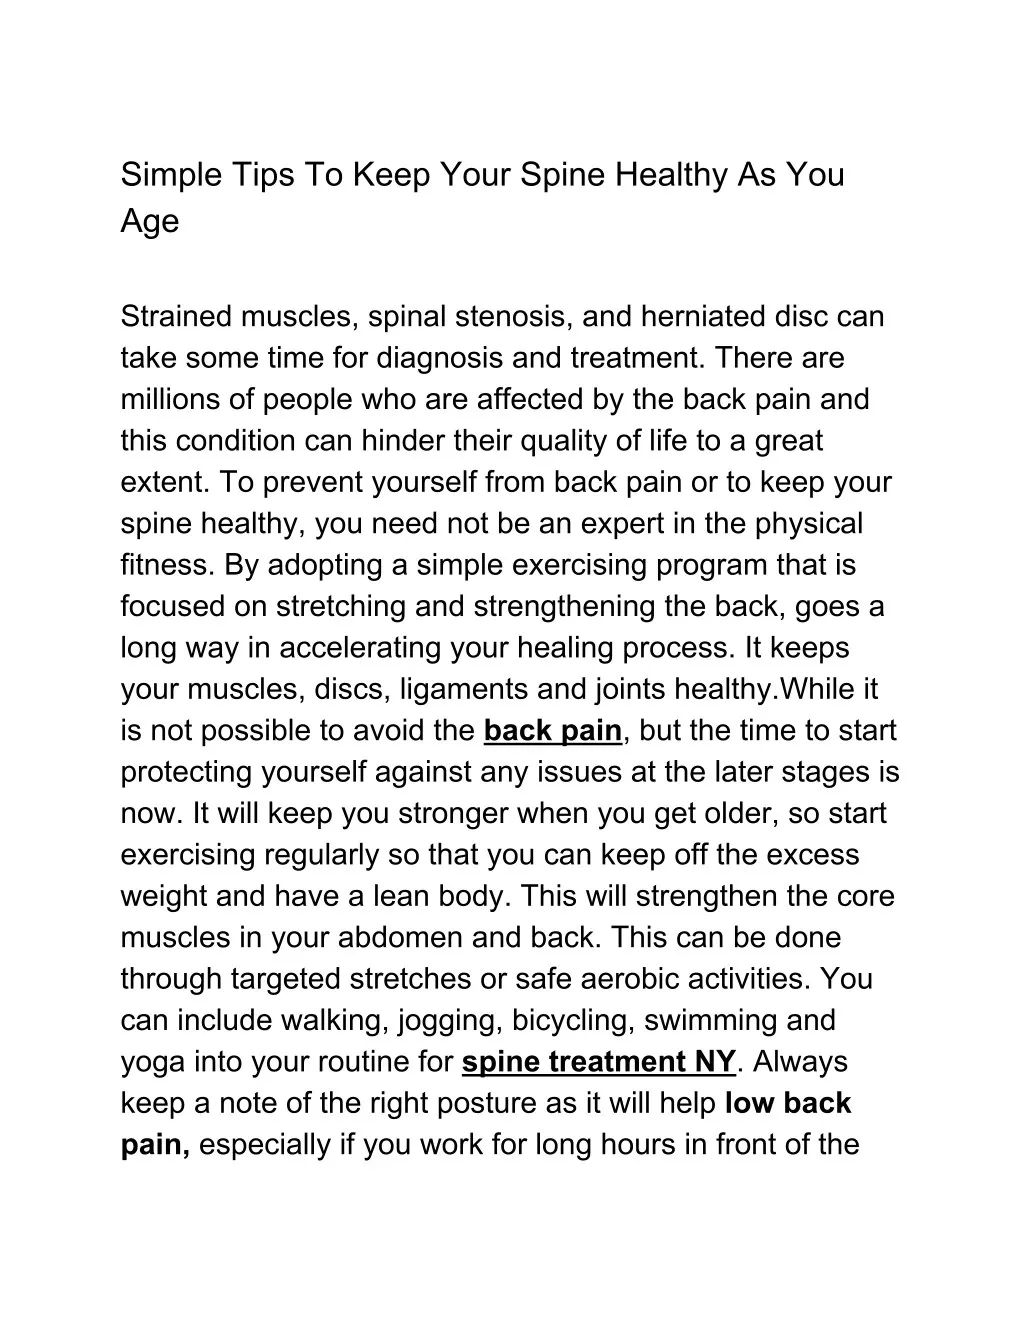 simple tips to keep your spine healthy as you age